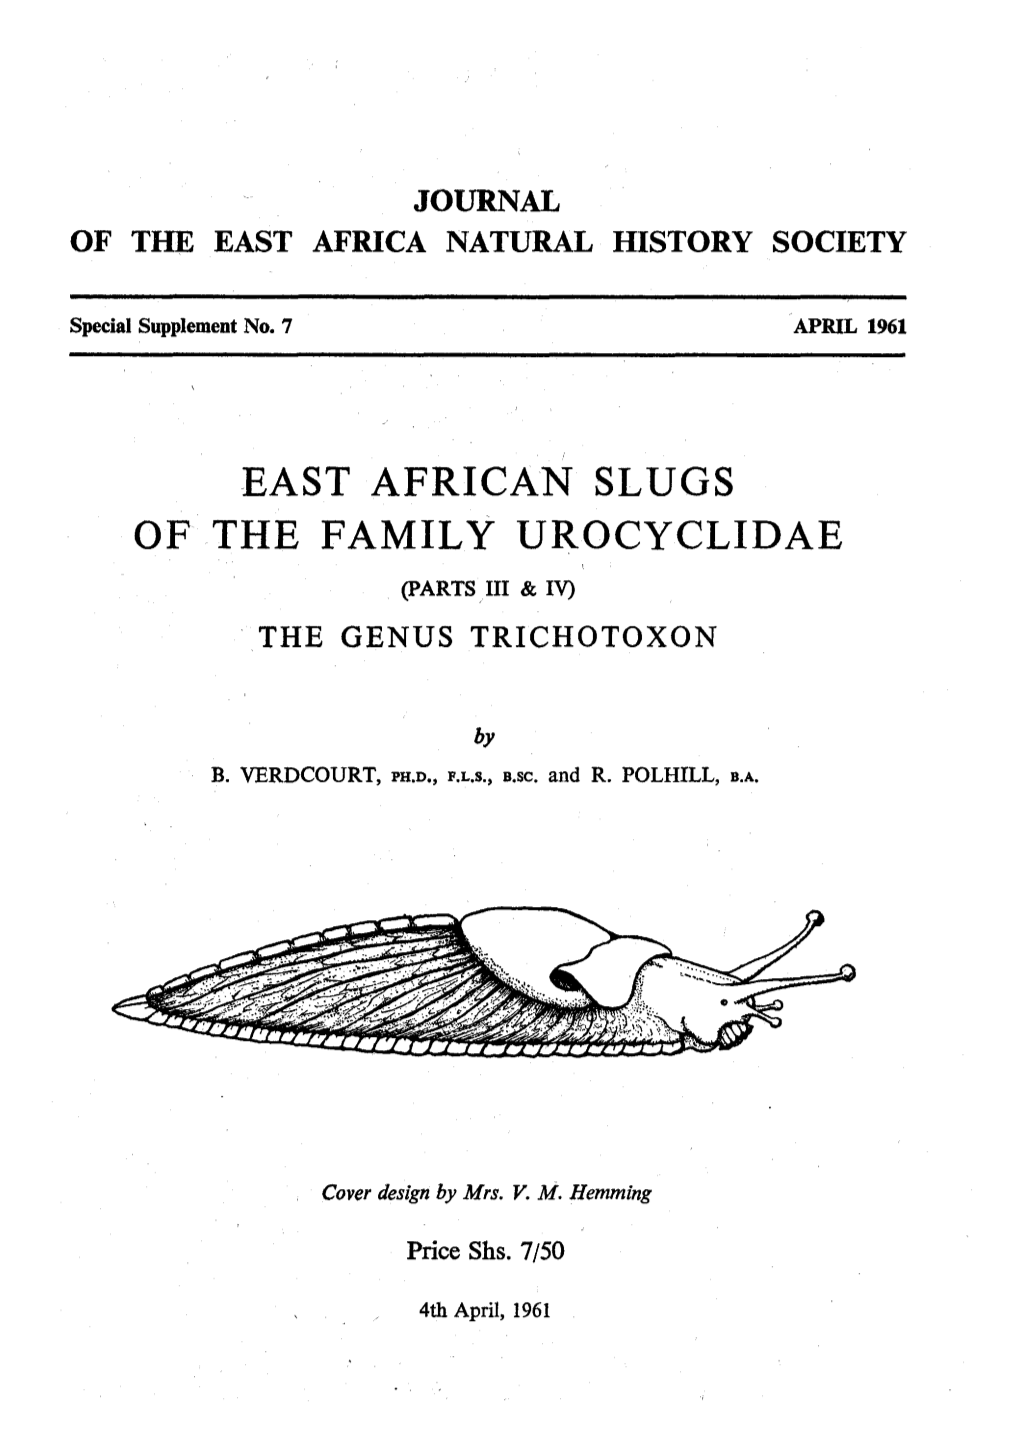 East African Slugs of the Family Urocyclidae